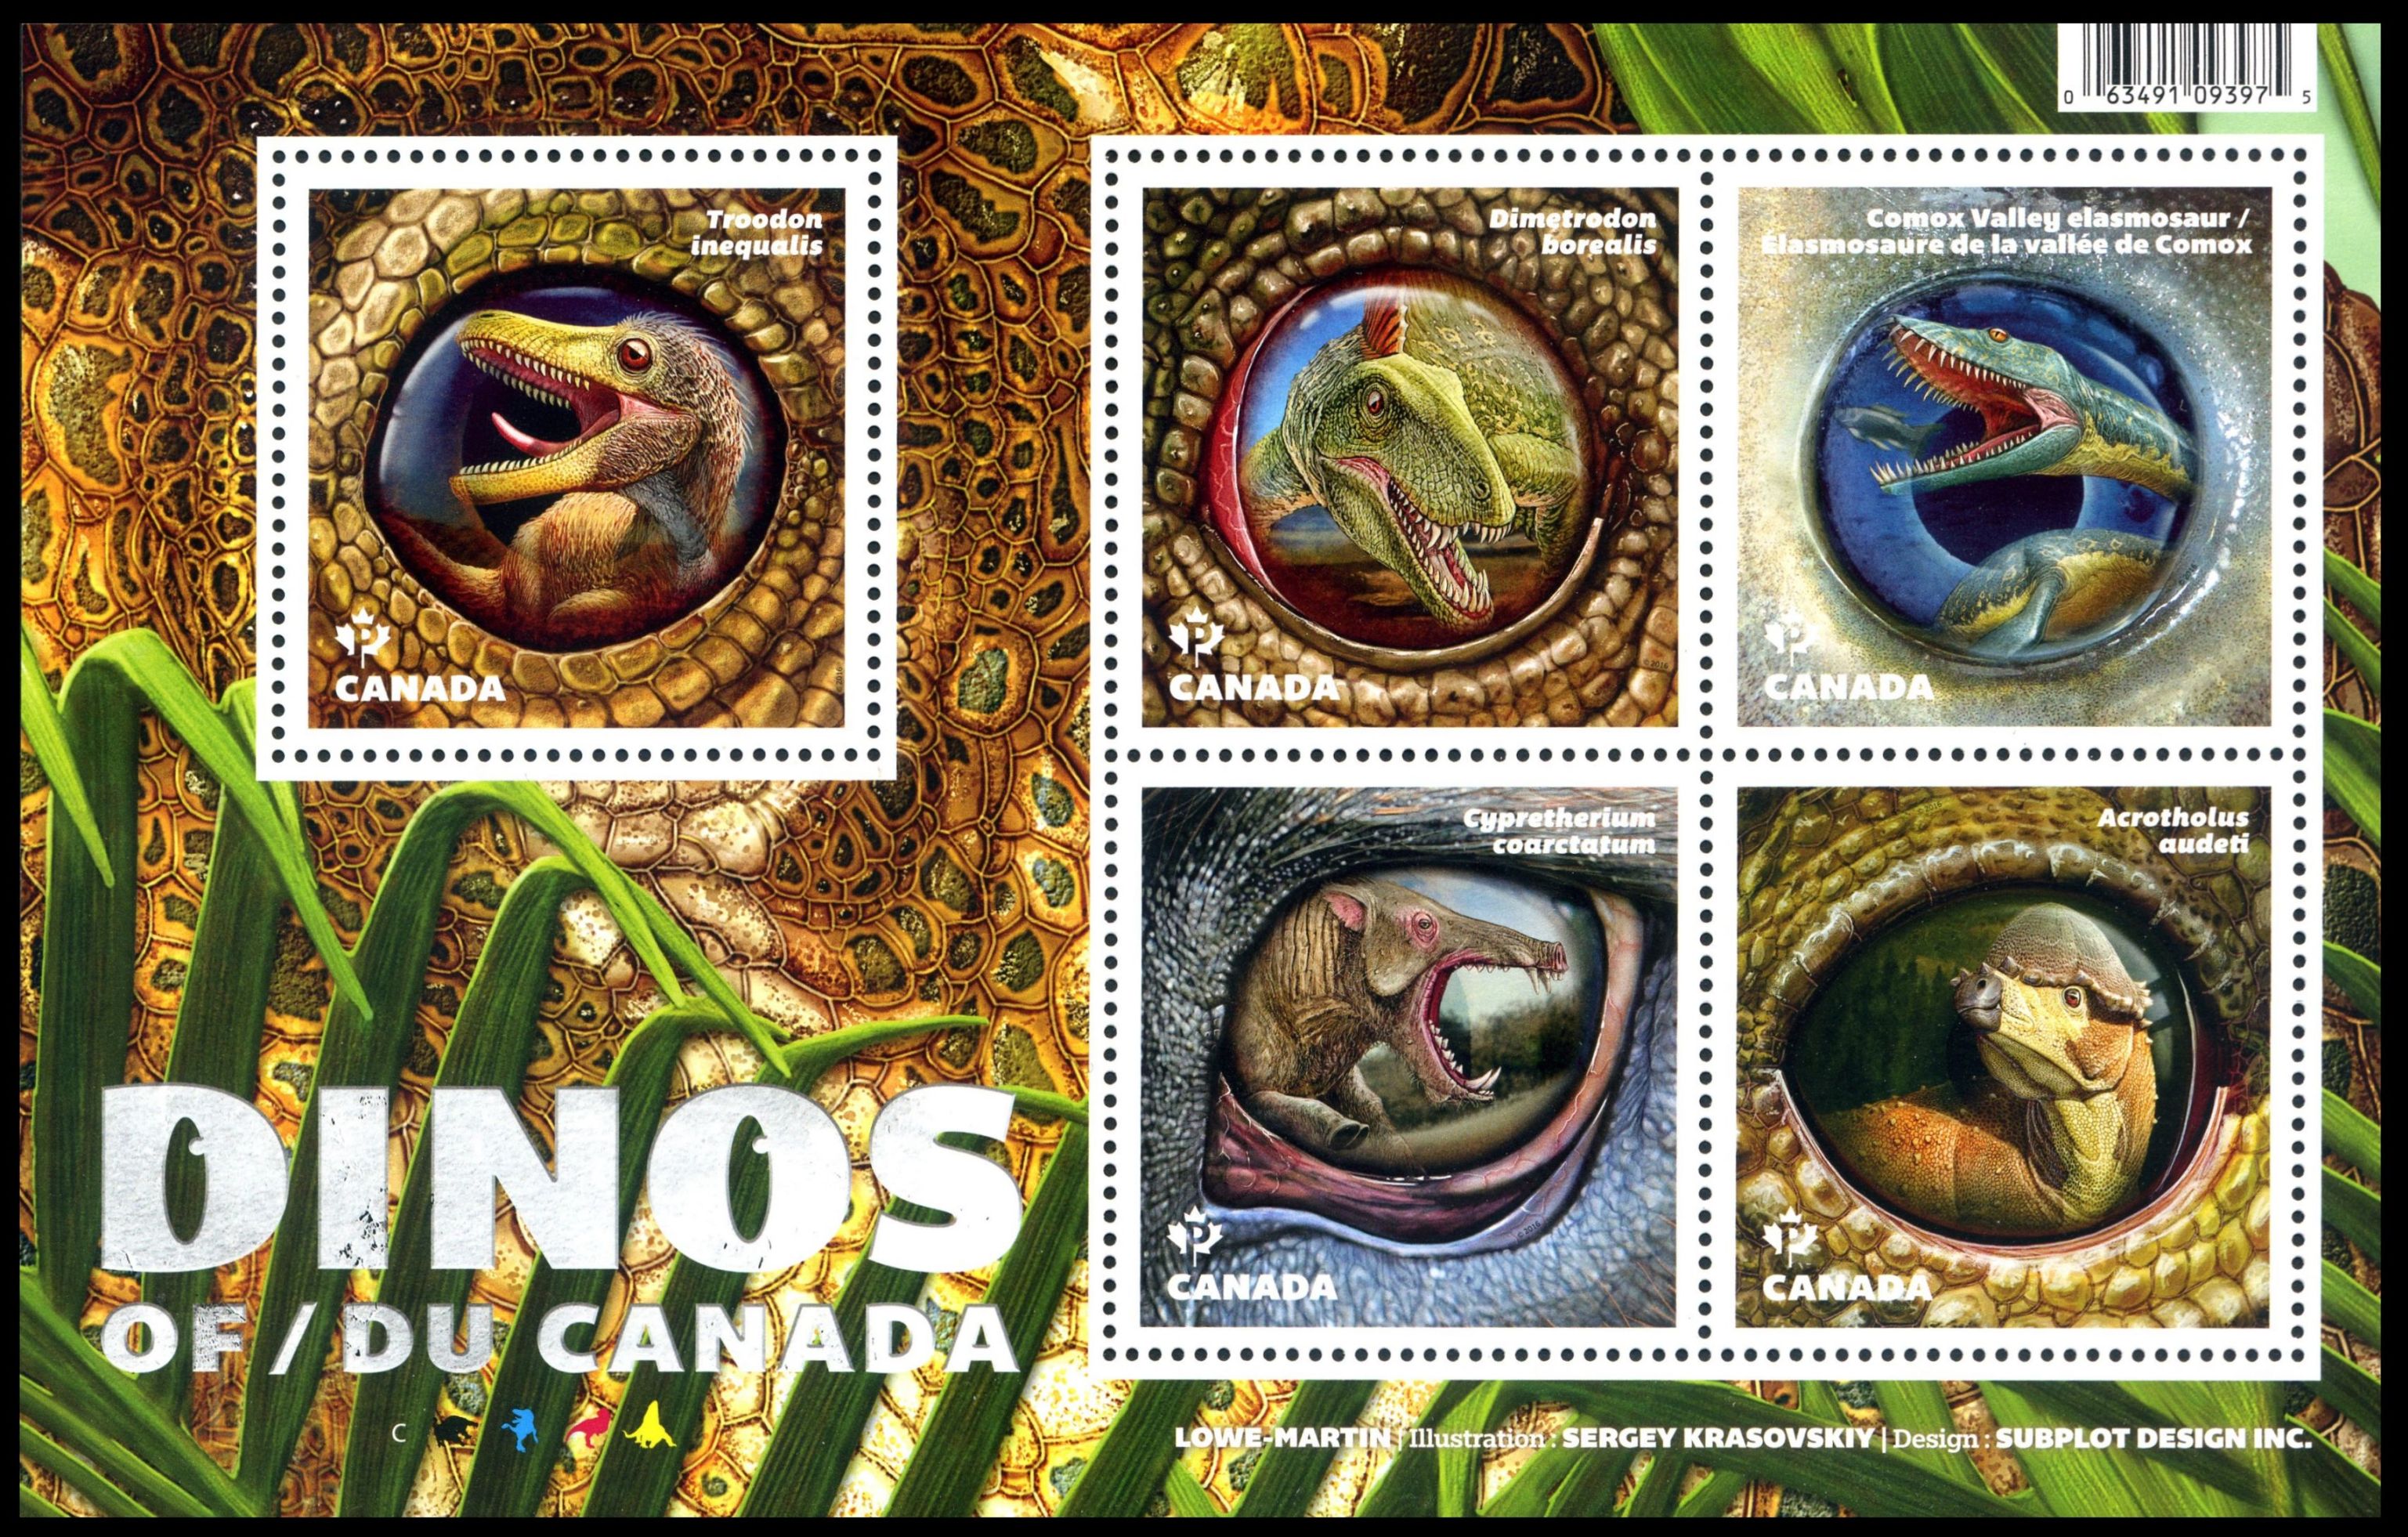 Dinosaurs on stamps of Canada